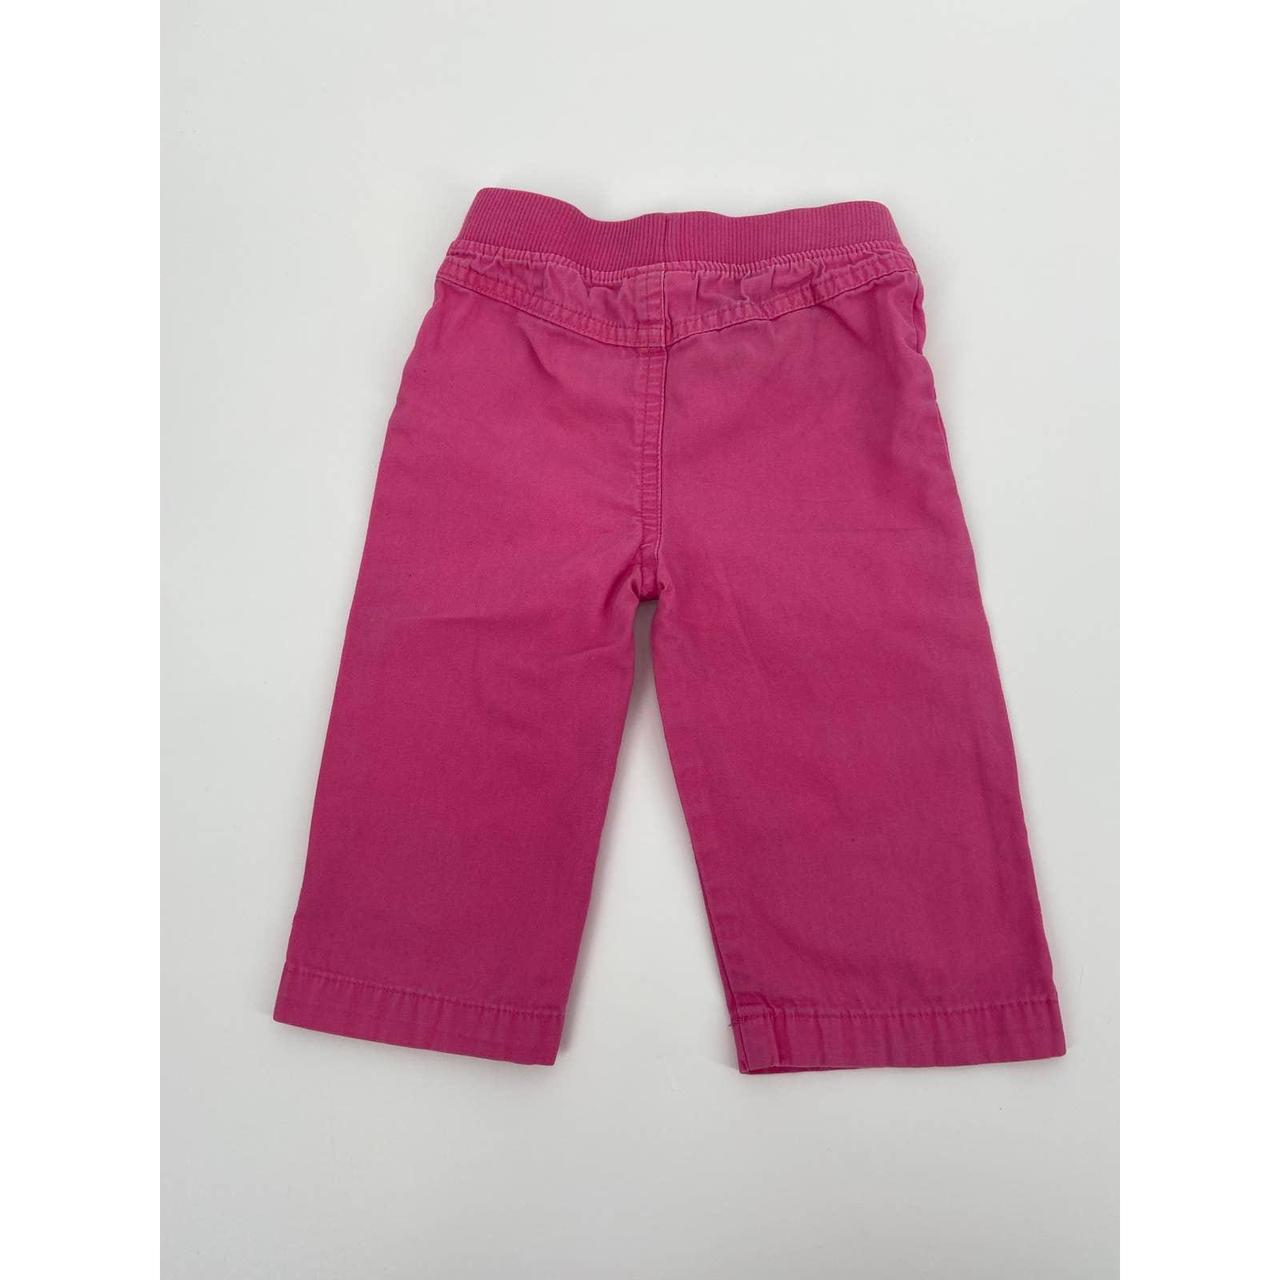 Product Image 3 - Little girls pink pants 12